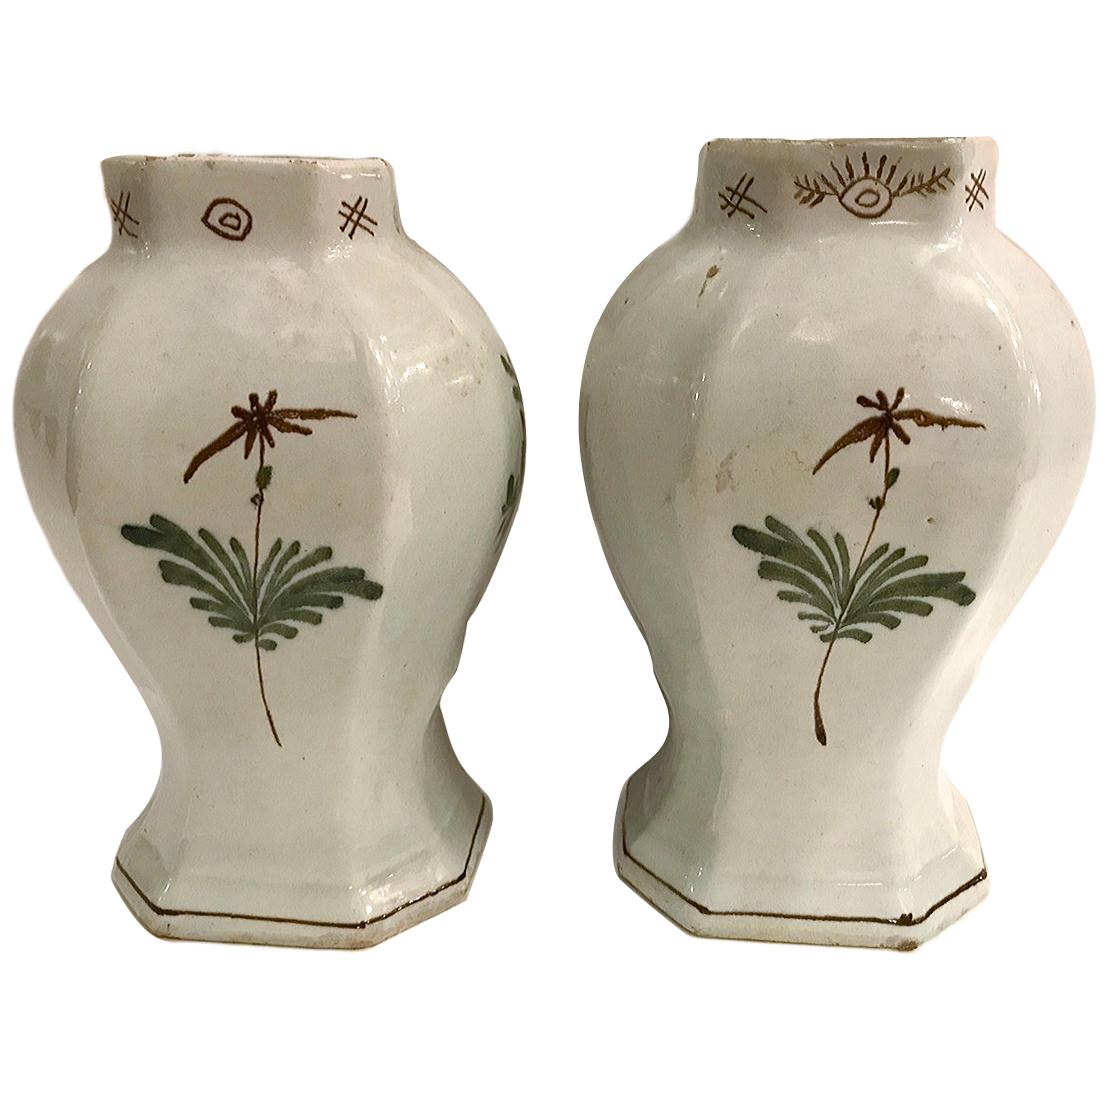 A pair of circa 1900 hand-painted Italian vases.

Measurements:
Height: 8.5